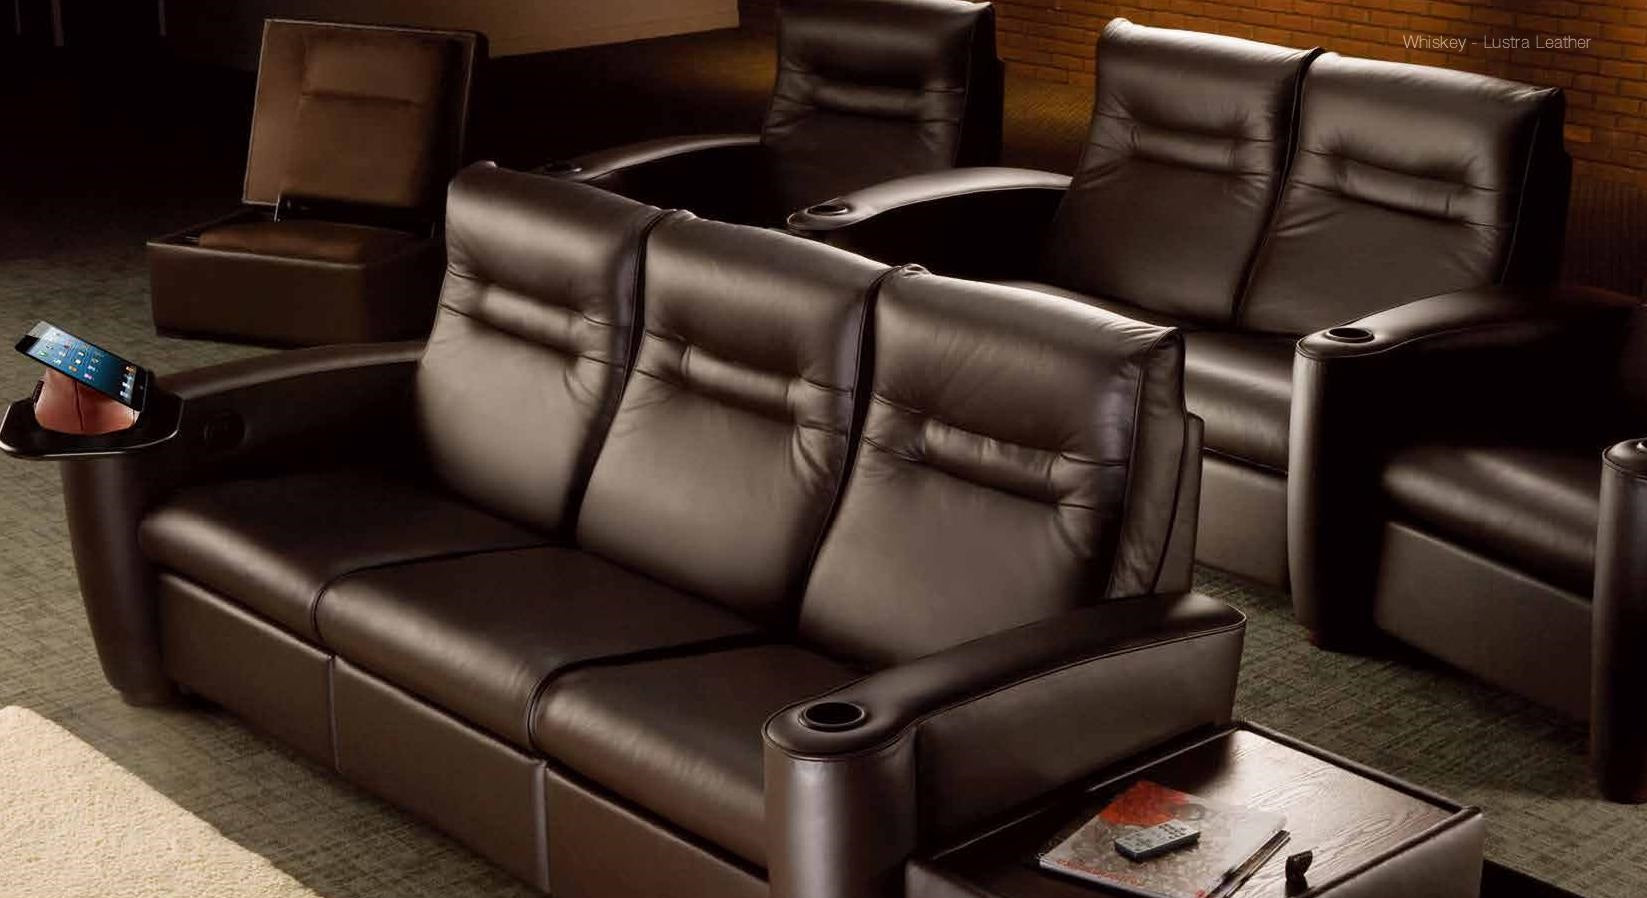 Salamander Designs - Talia Entertainment Seating-Home Movie Decor with Home Theater Mart - Located in Chicago, IL